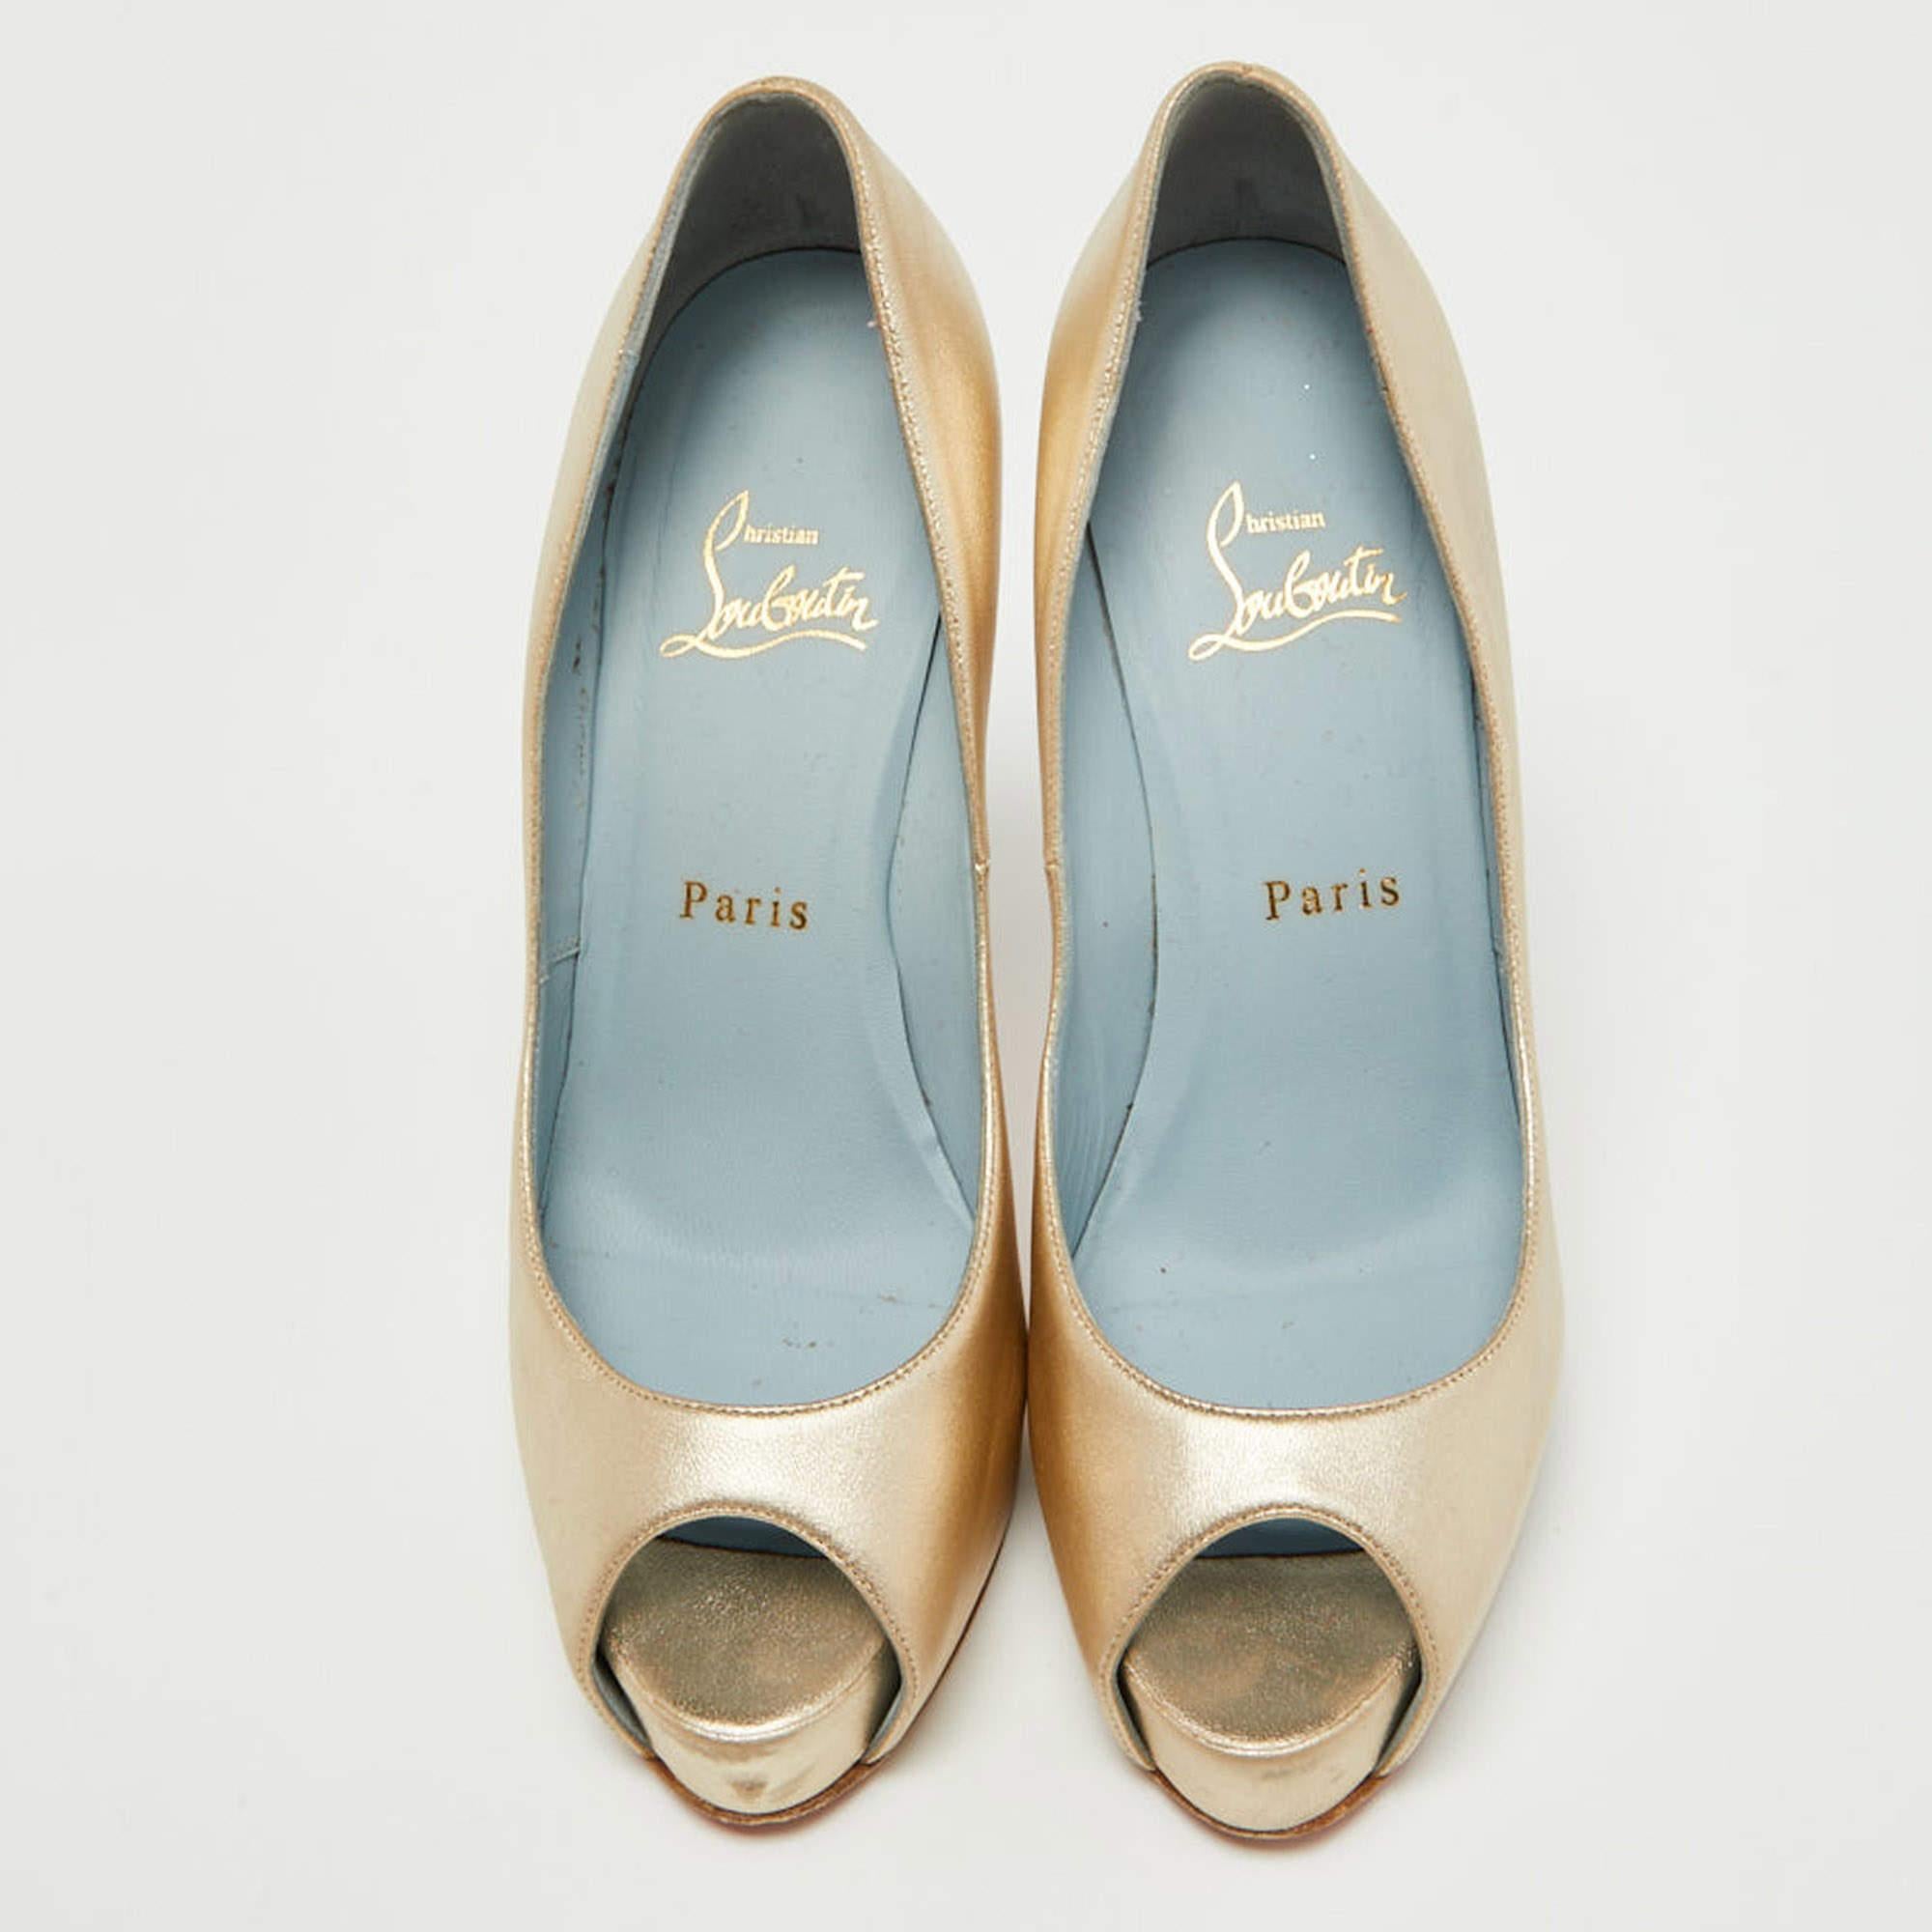 Christian Louboutin Gold Leather Very Prive Pumps Size 38.5 In Good Condition For Sale In Dubai, Al Qouz 2